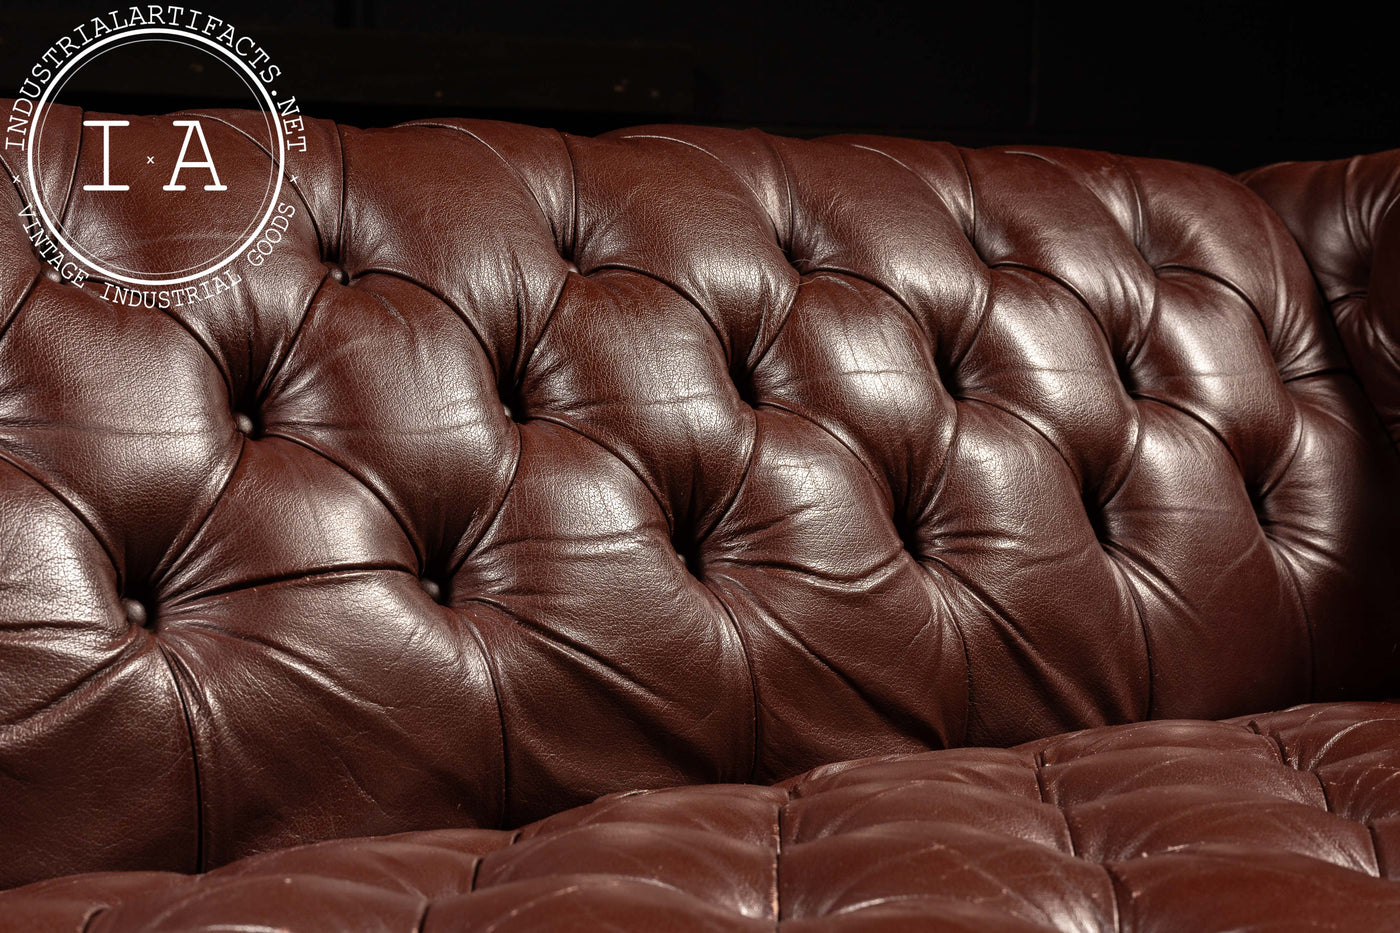 Antique Oxblood Chesterfield